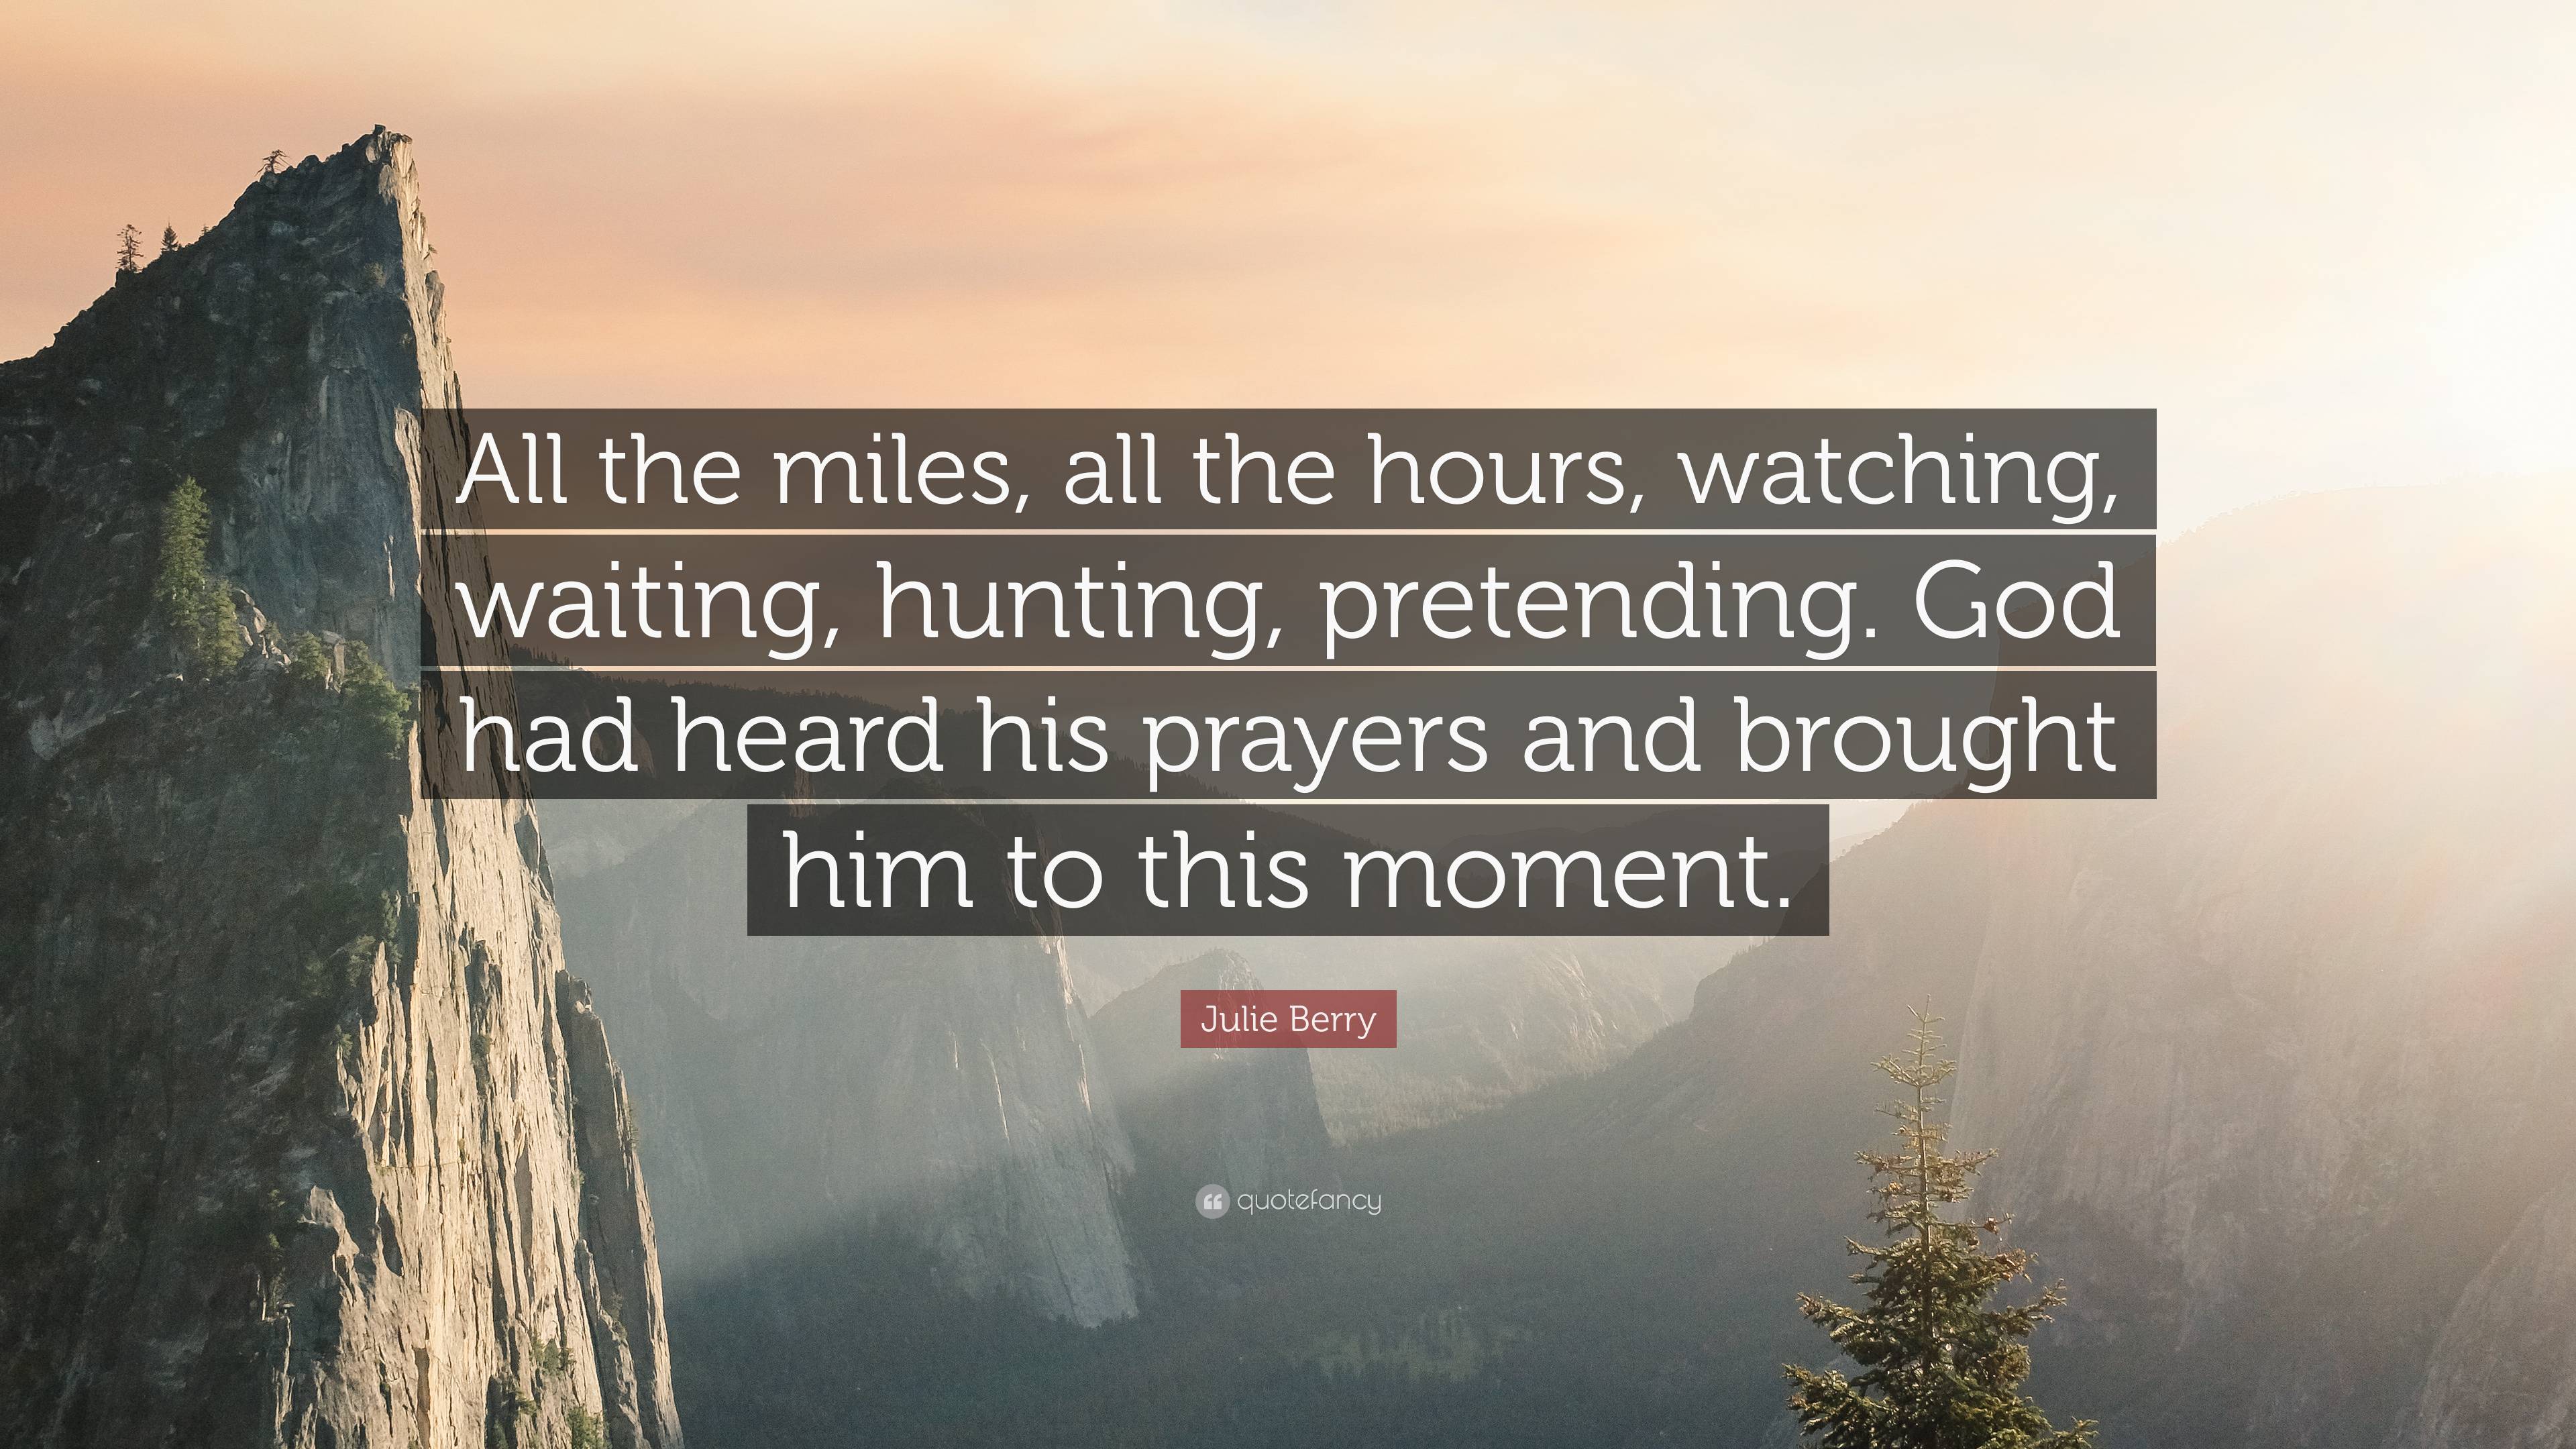 Julie Berry Quote: “All the miles, all the hours, watching, waiting,  hunting, pretending. God had heard his prayers and brought him to this ”